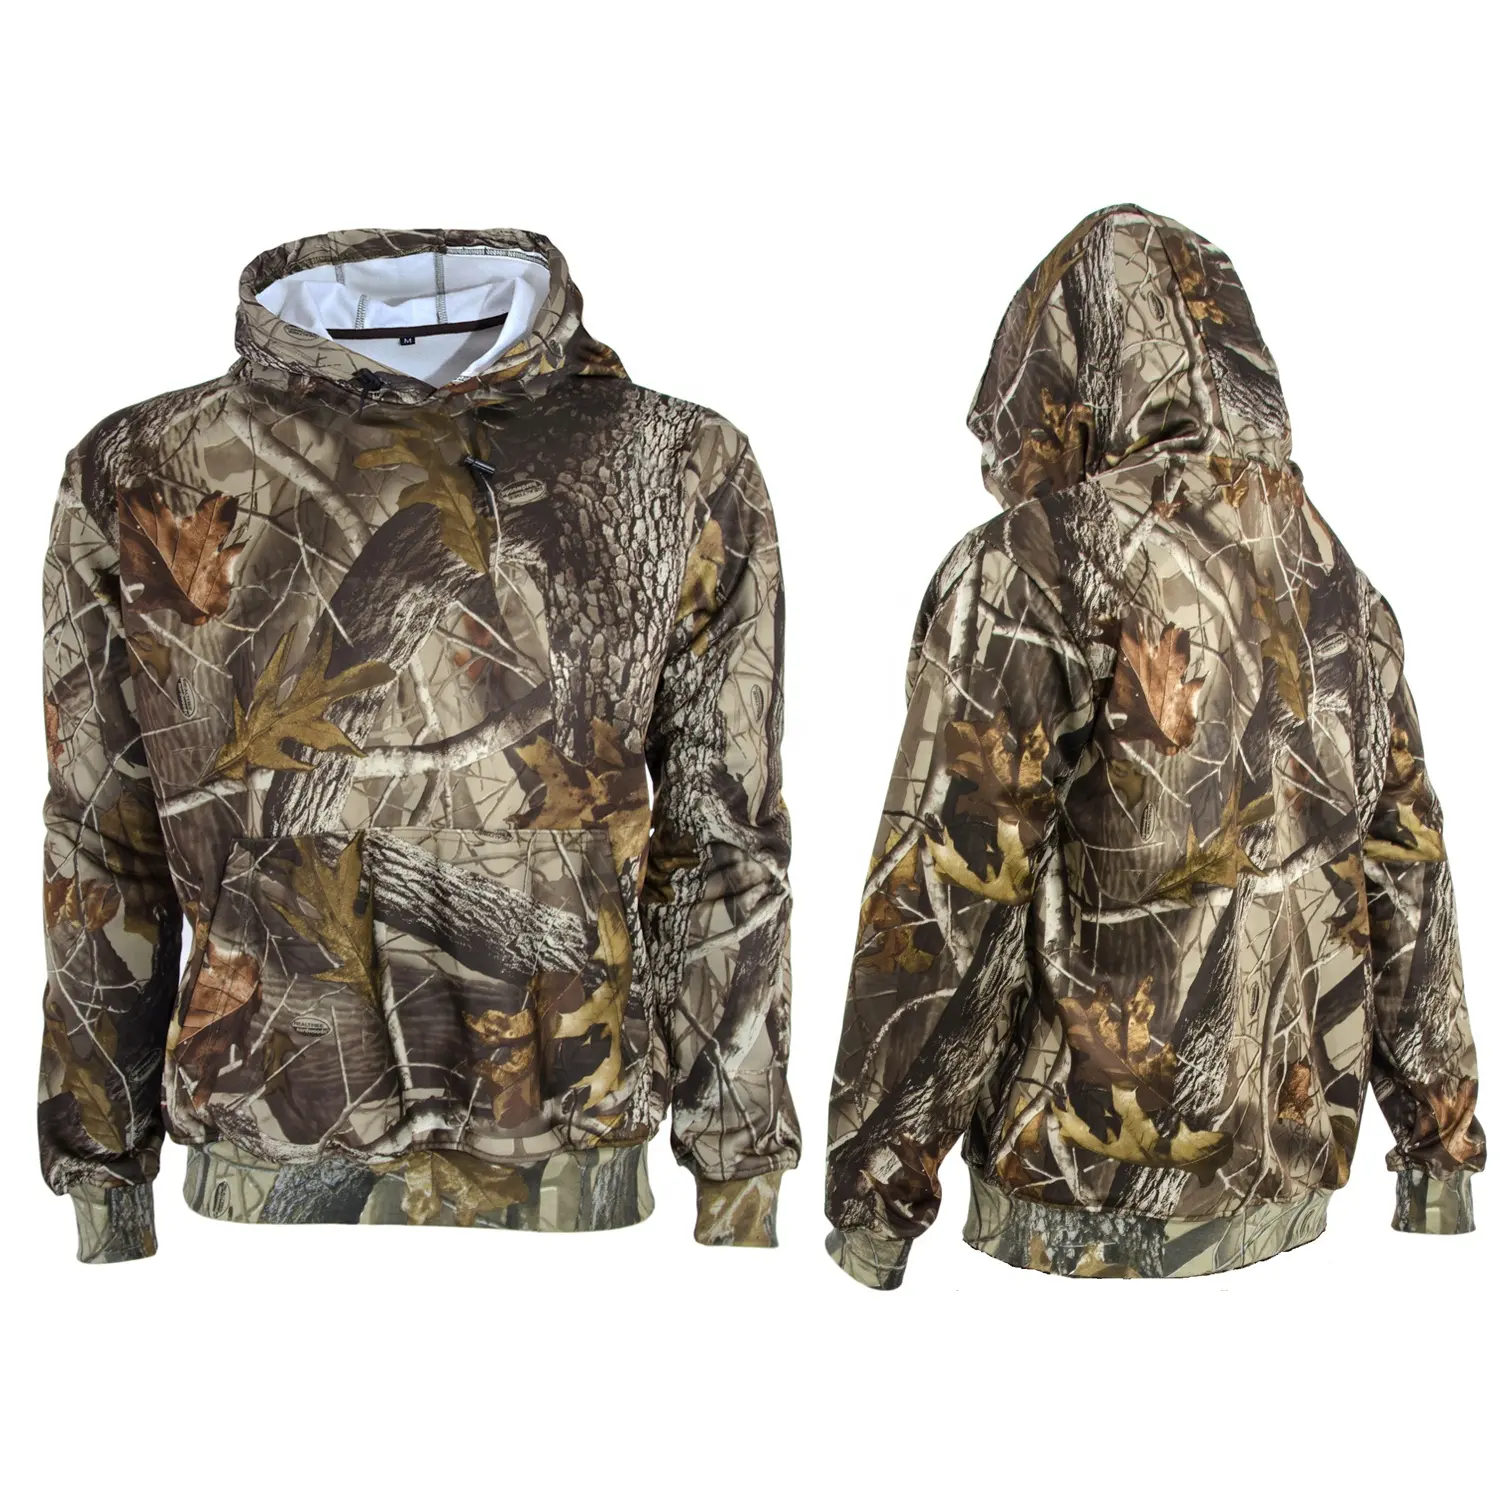 Camouflage men's hunting hoodie pullover for hunter from BJ Outdoor